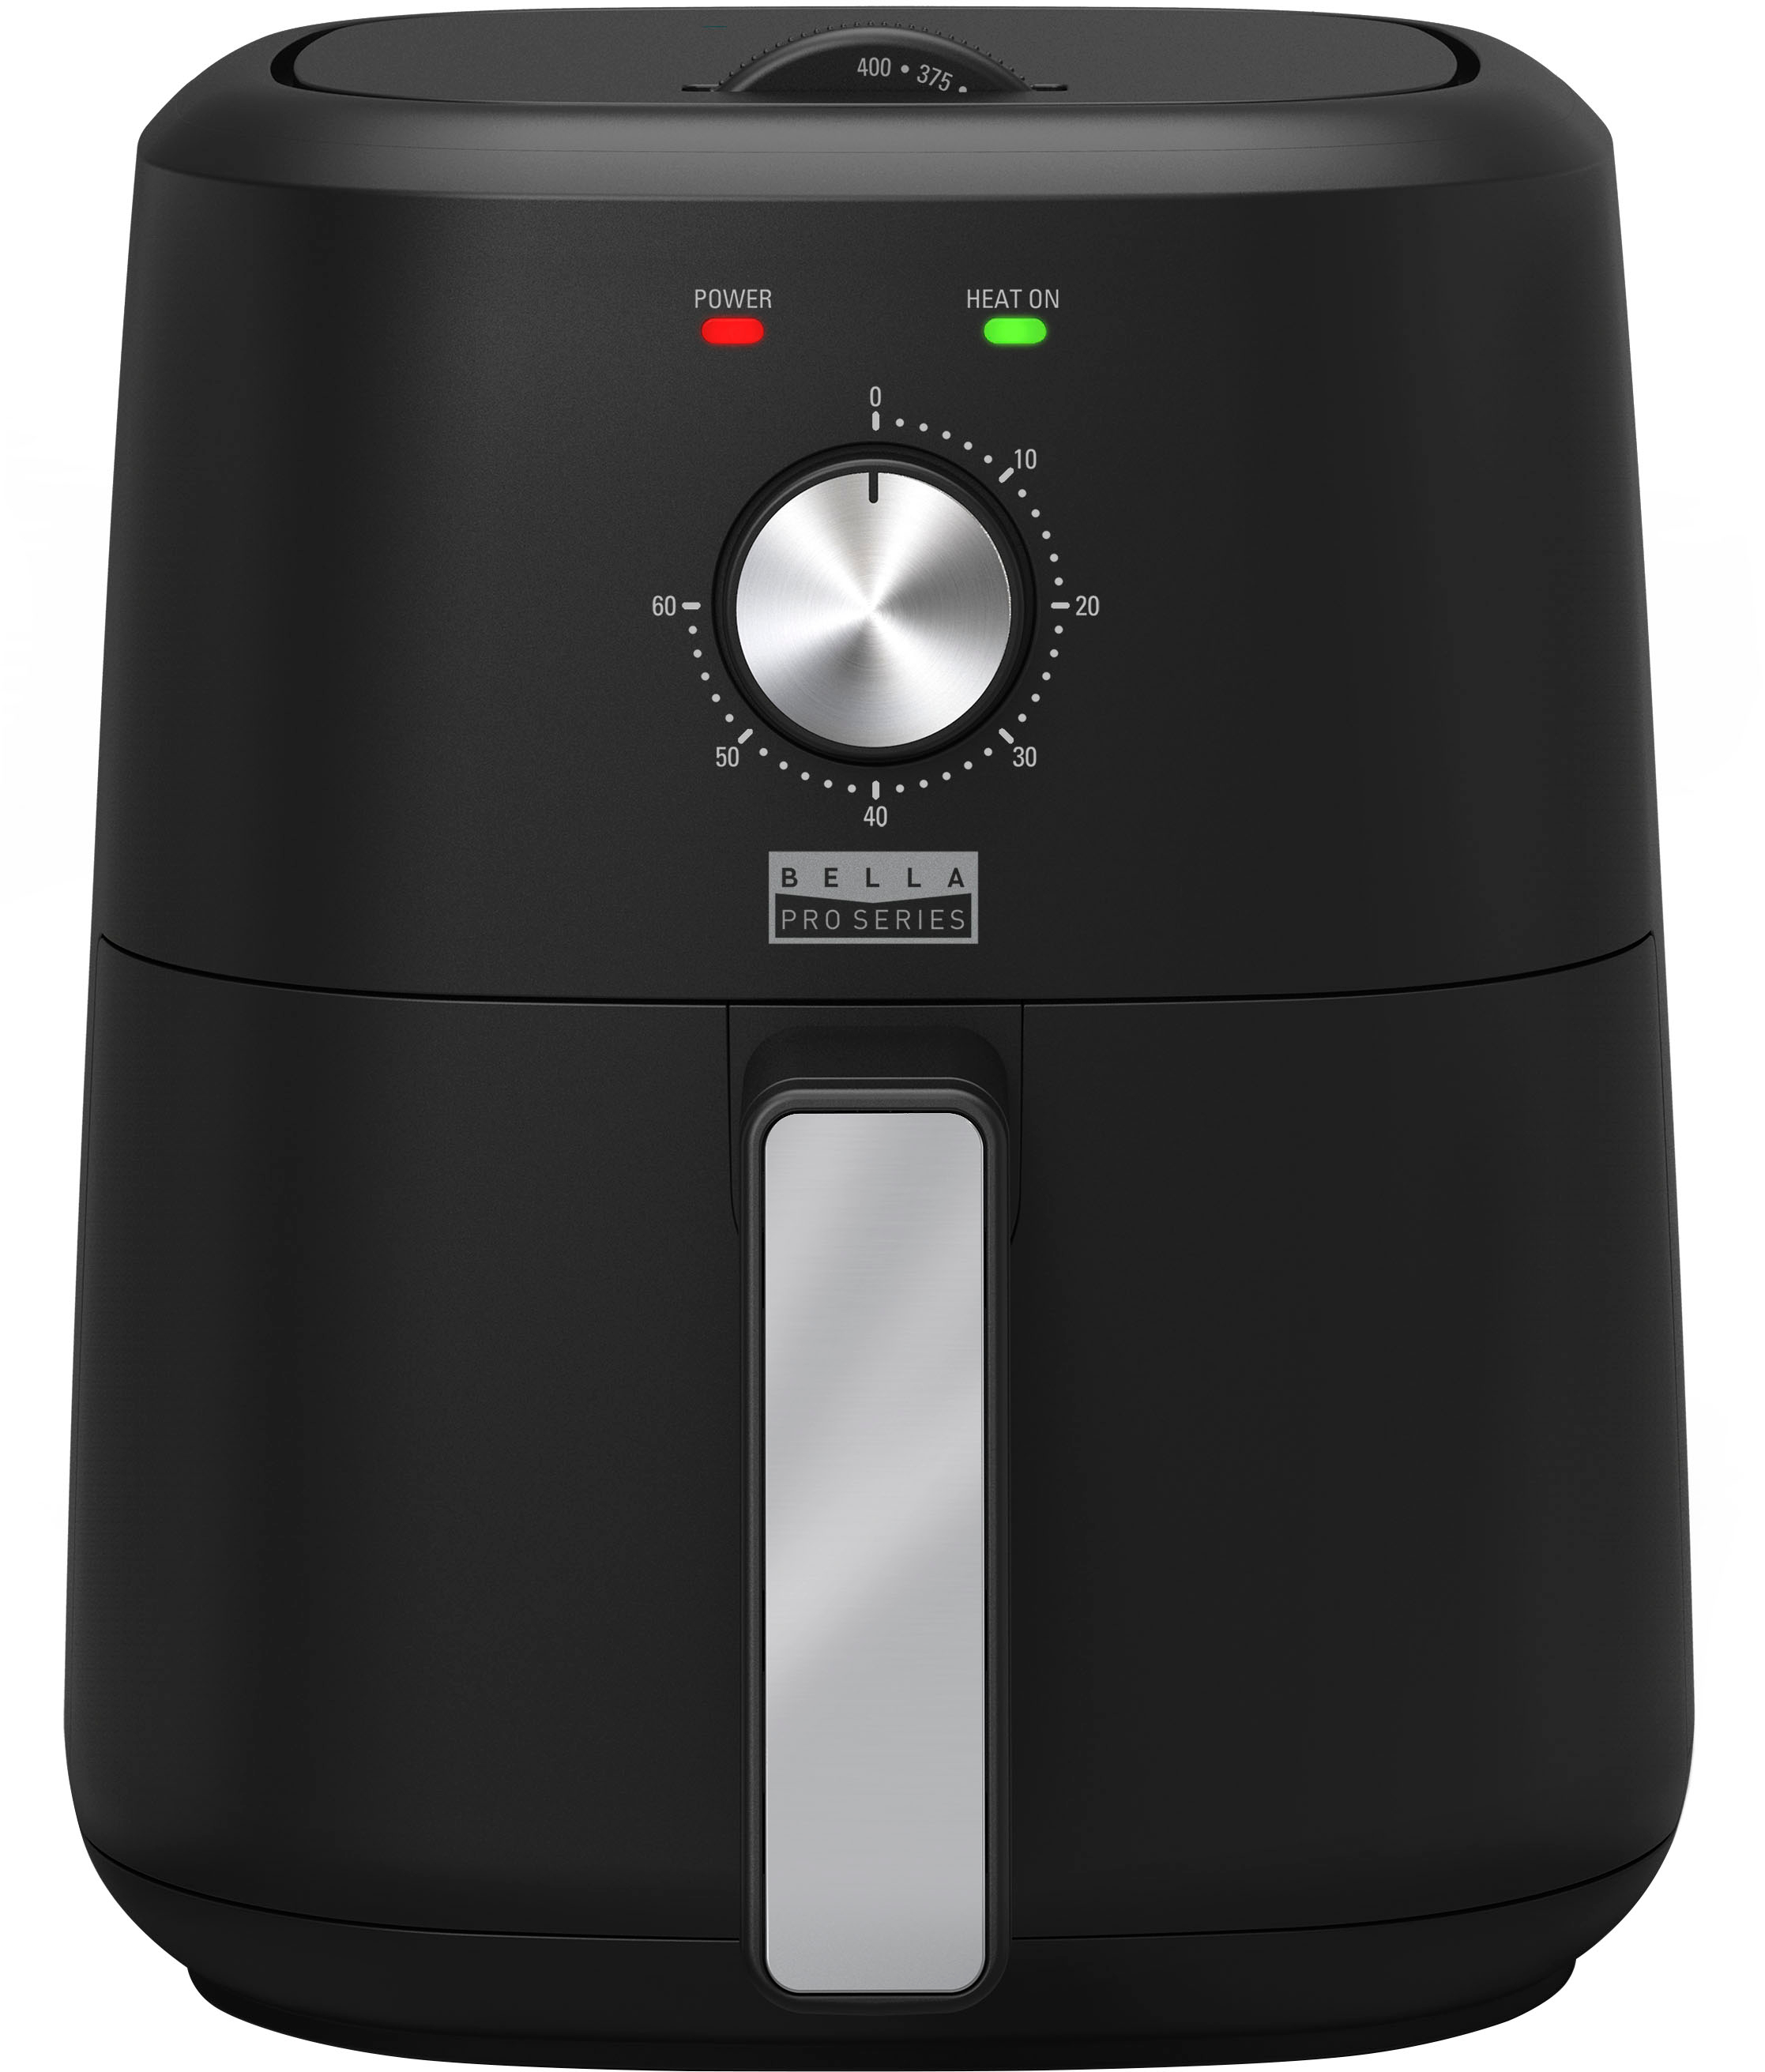 This Could Be Your Last Chance to Buy This Top-Rated $30 Air Fryer